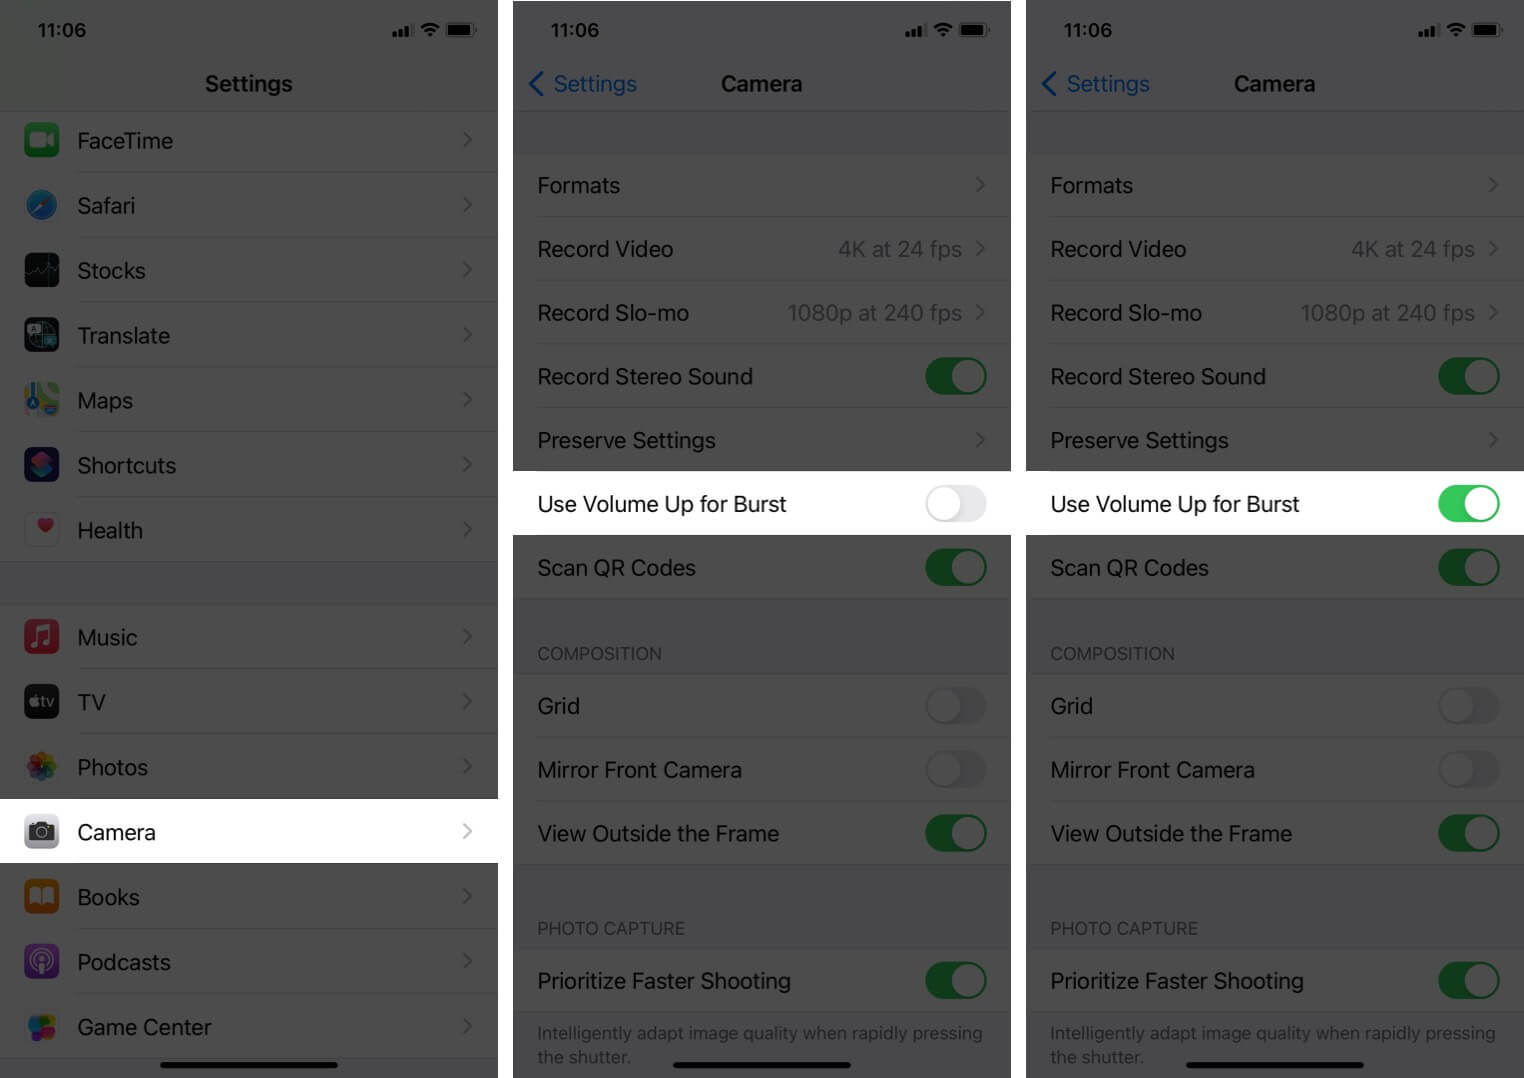 tap on camera in settings and enable use volume up for burst on iphone 11 running ios 14